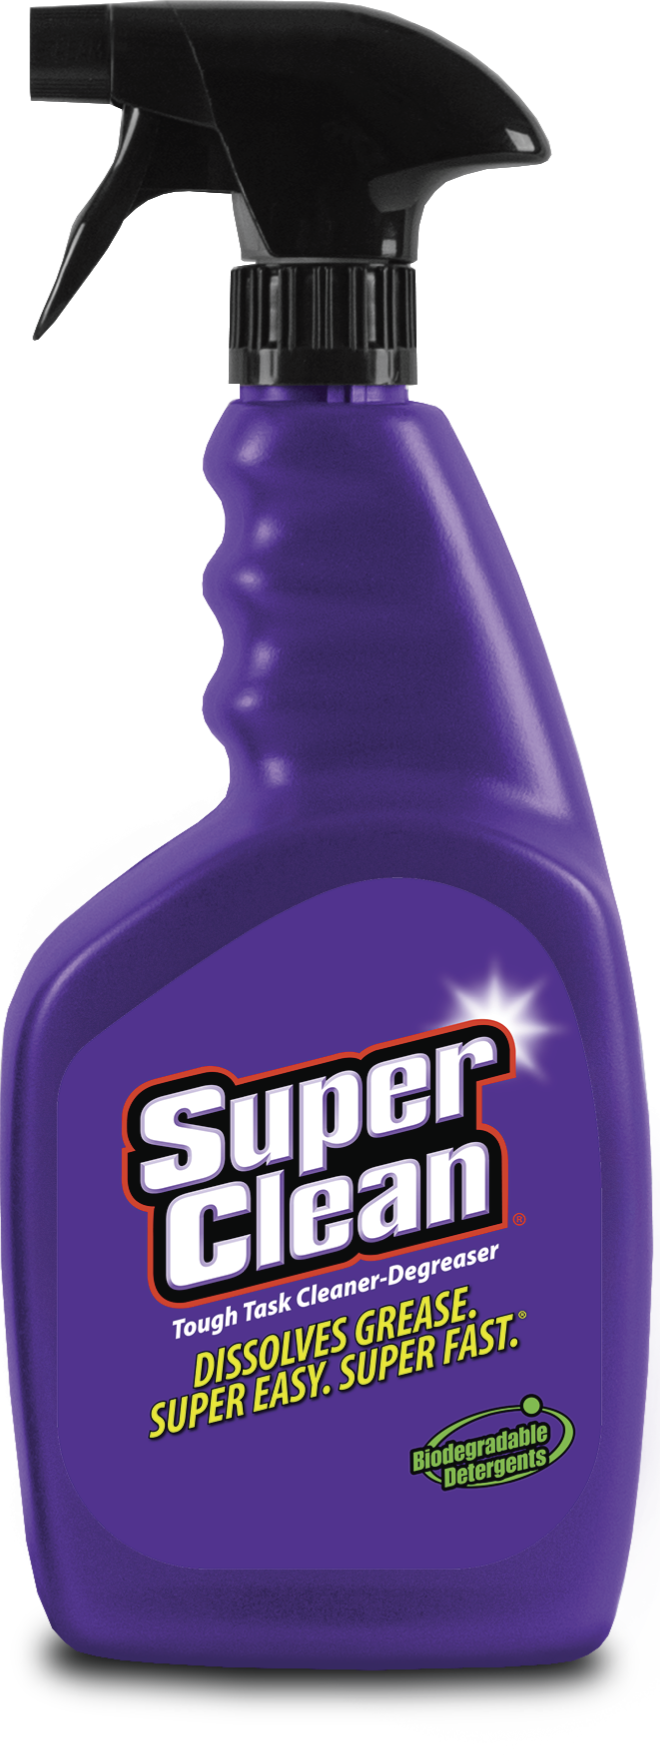 Purple Power Tire Cleaner Review 